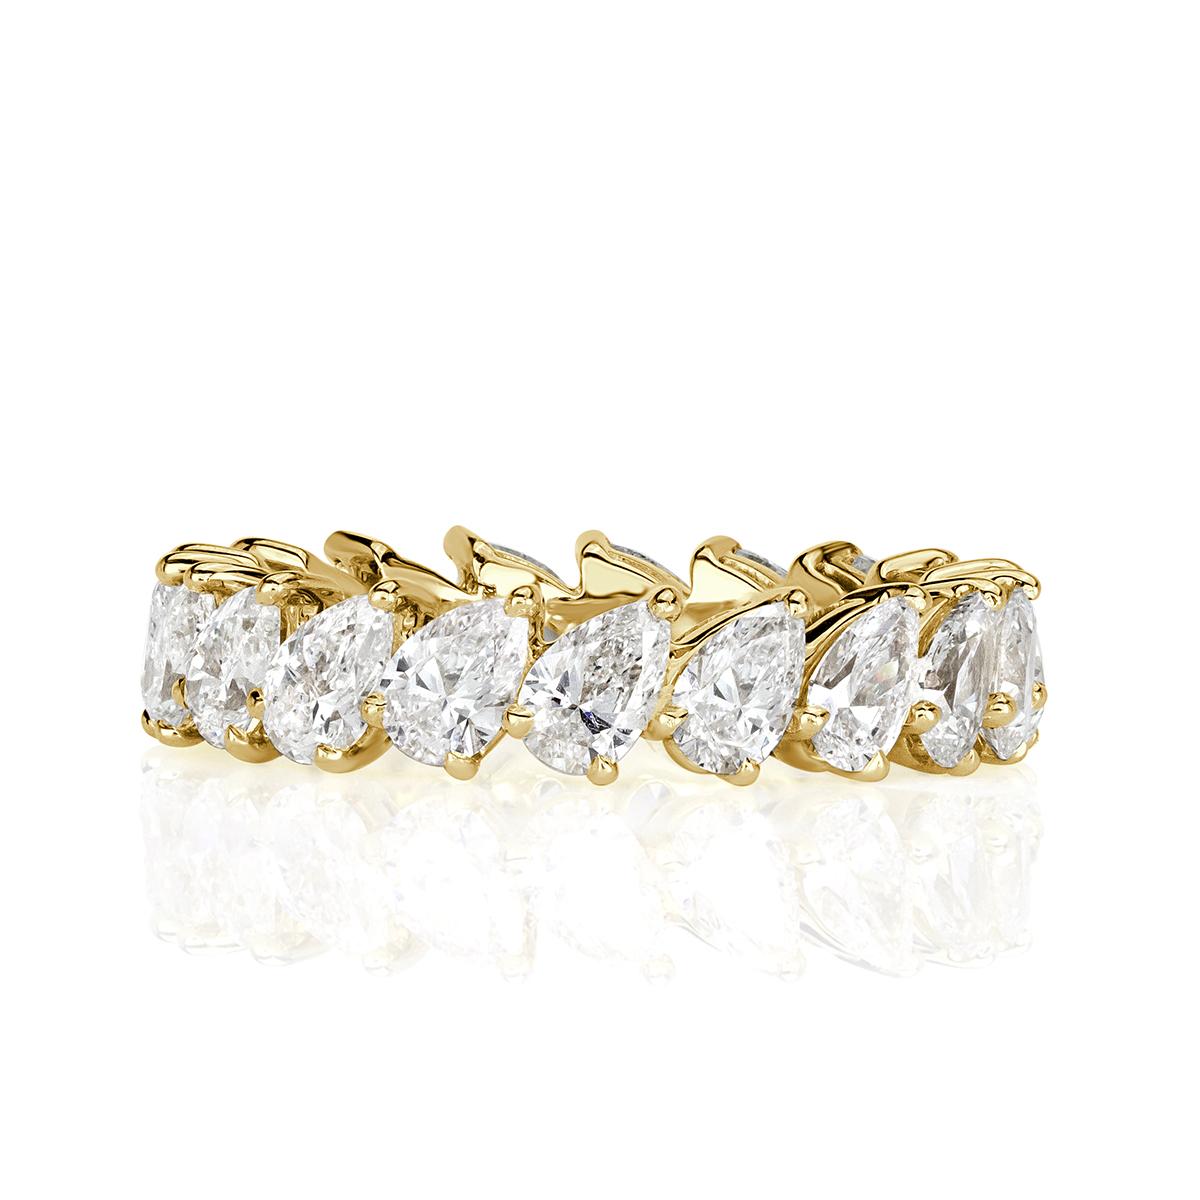 Mark Broumand 3.65 Carat Pear Shaped Diamond Eternity Band in 18 Karat Gold In New Condition For Sale In Los Angeles, CA